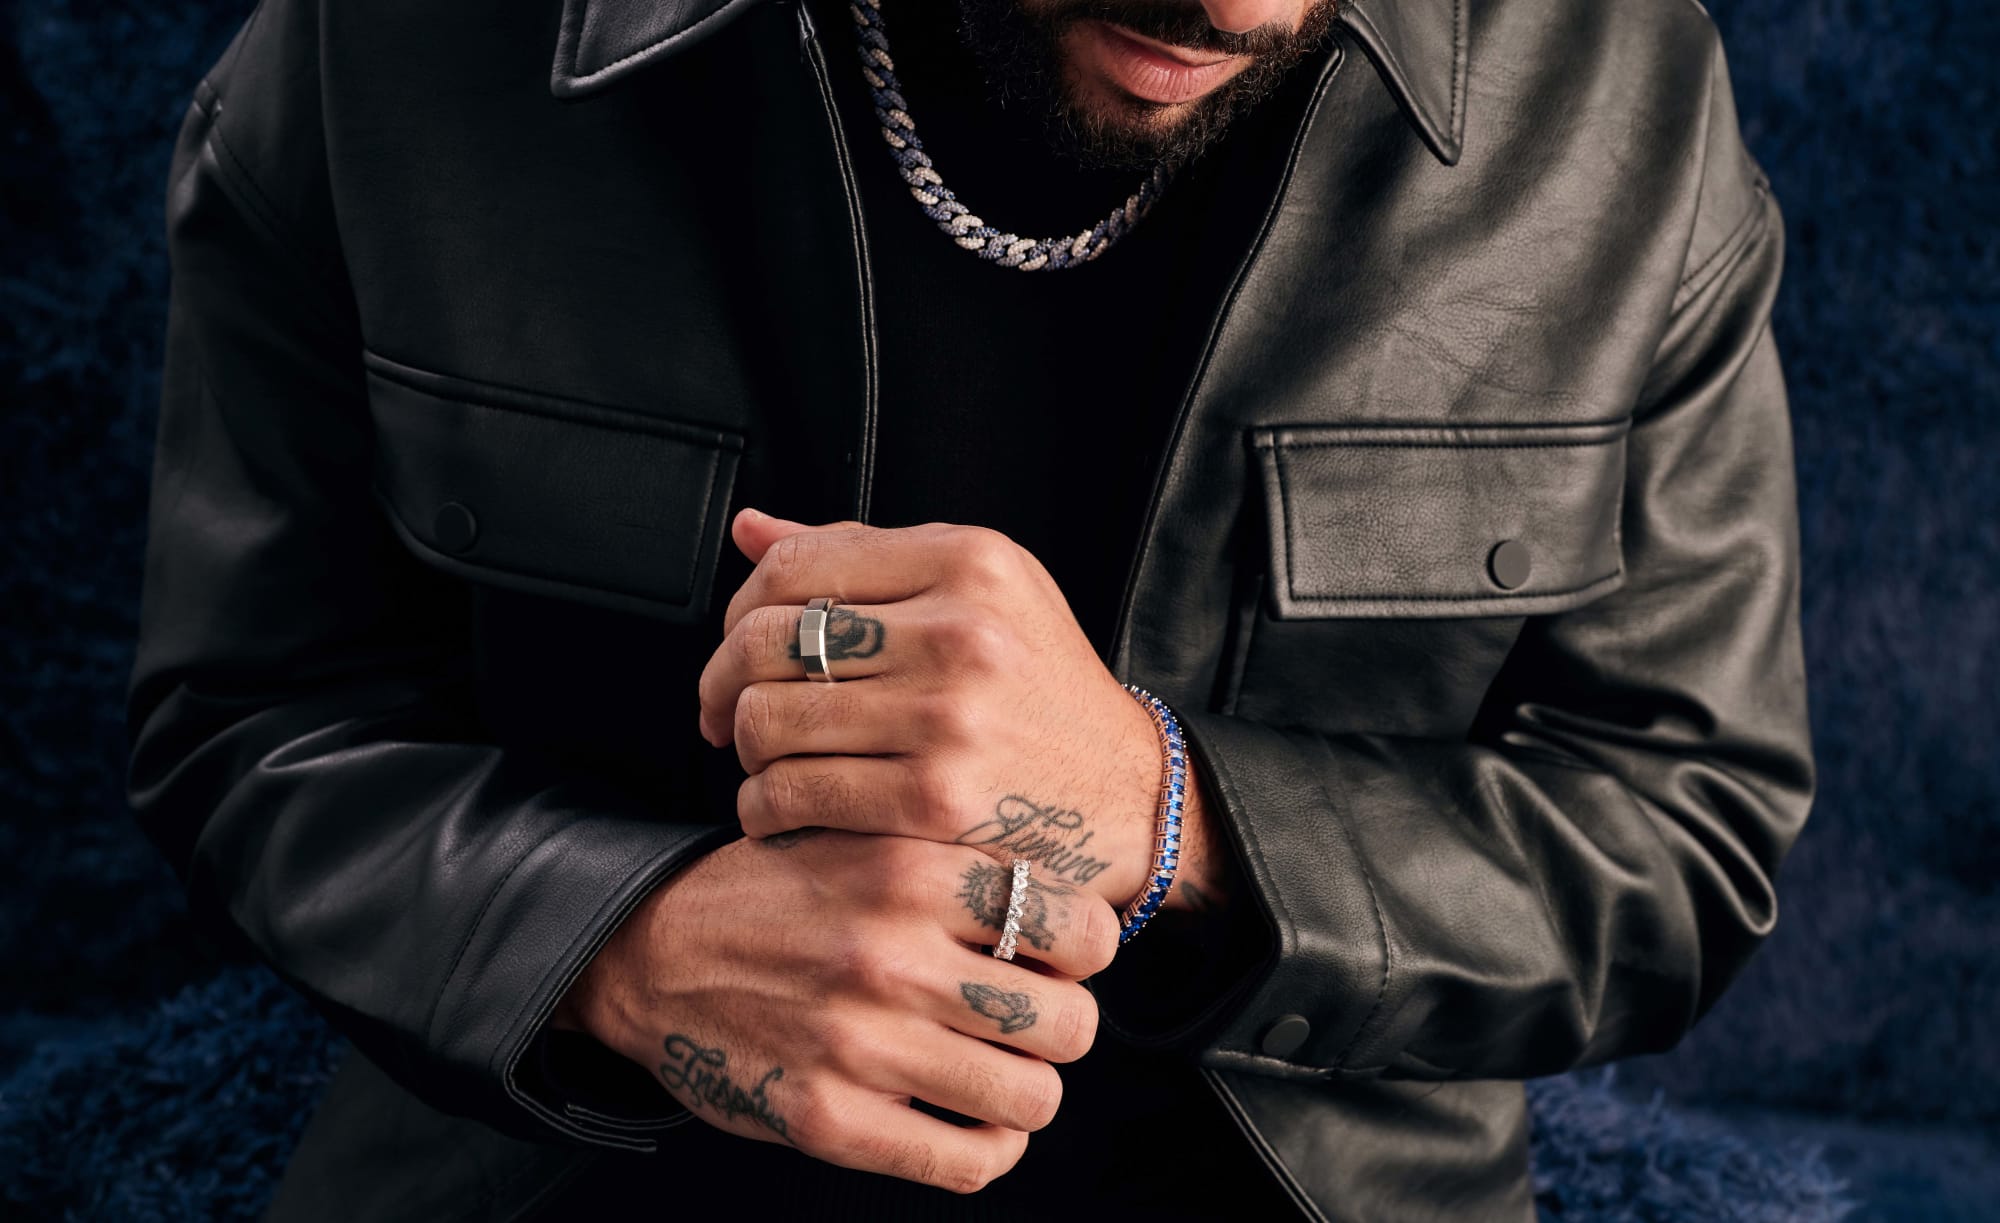 Don Benjamin wearing a black leather jacket and pants, and JAXXON jewelry pieces featuring the Blue Iced Out Cuban Link Chain.